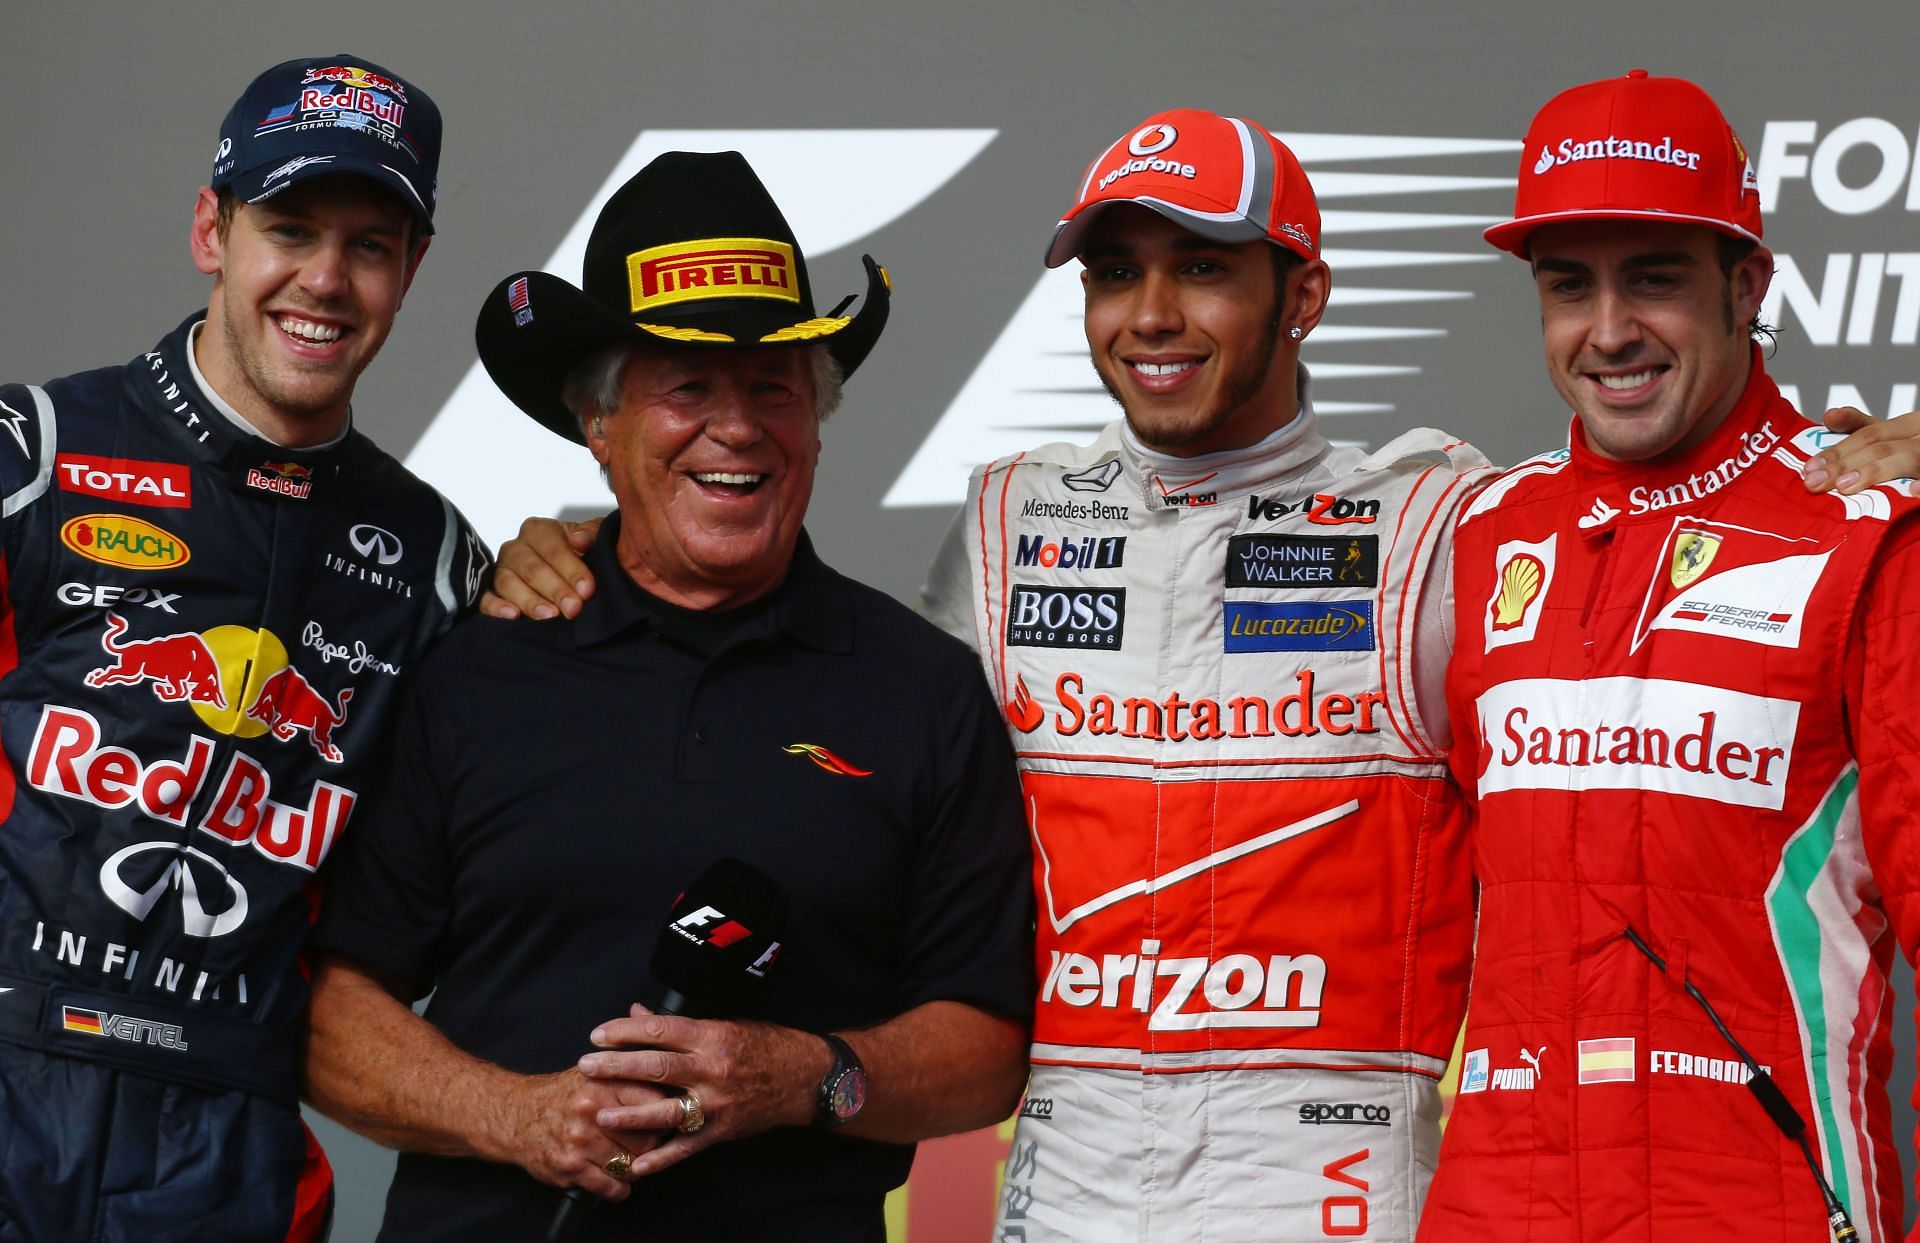 F1 made a return to the US in Austin in 2012 and will add Miami to the list this season